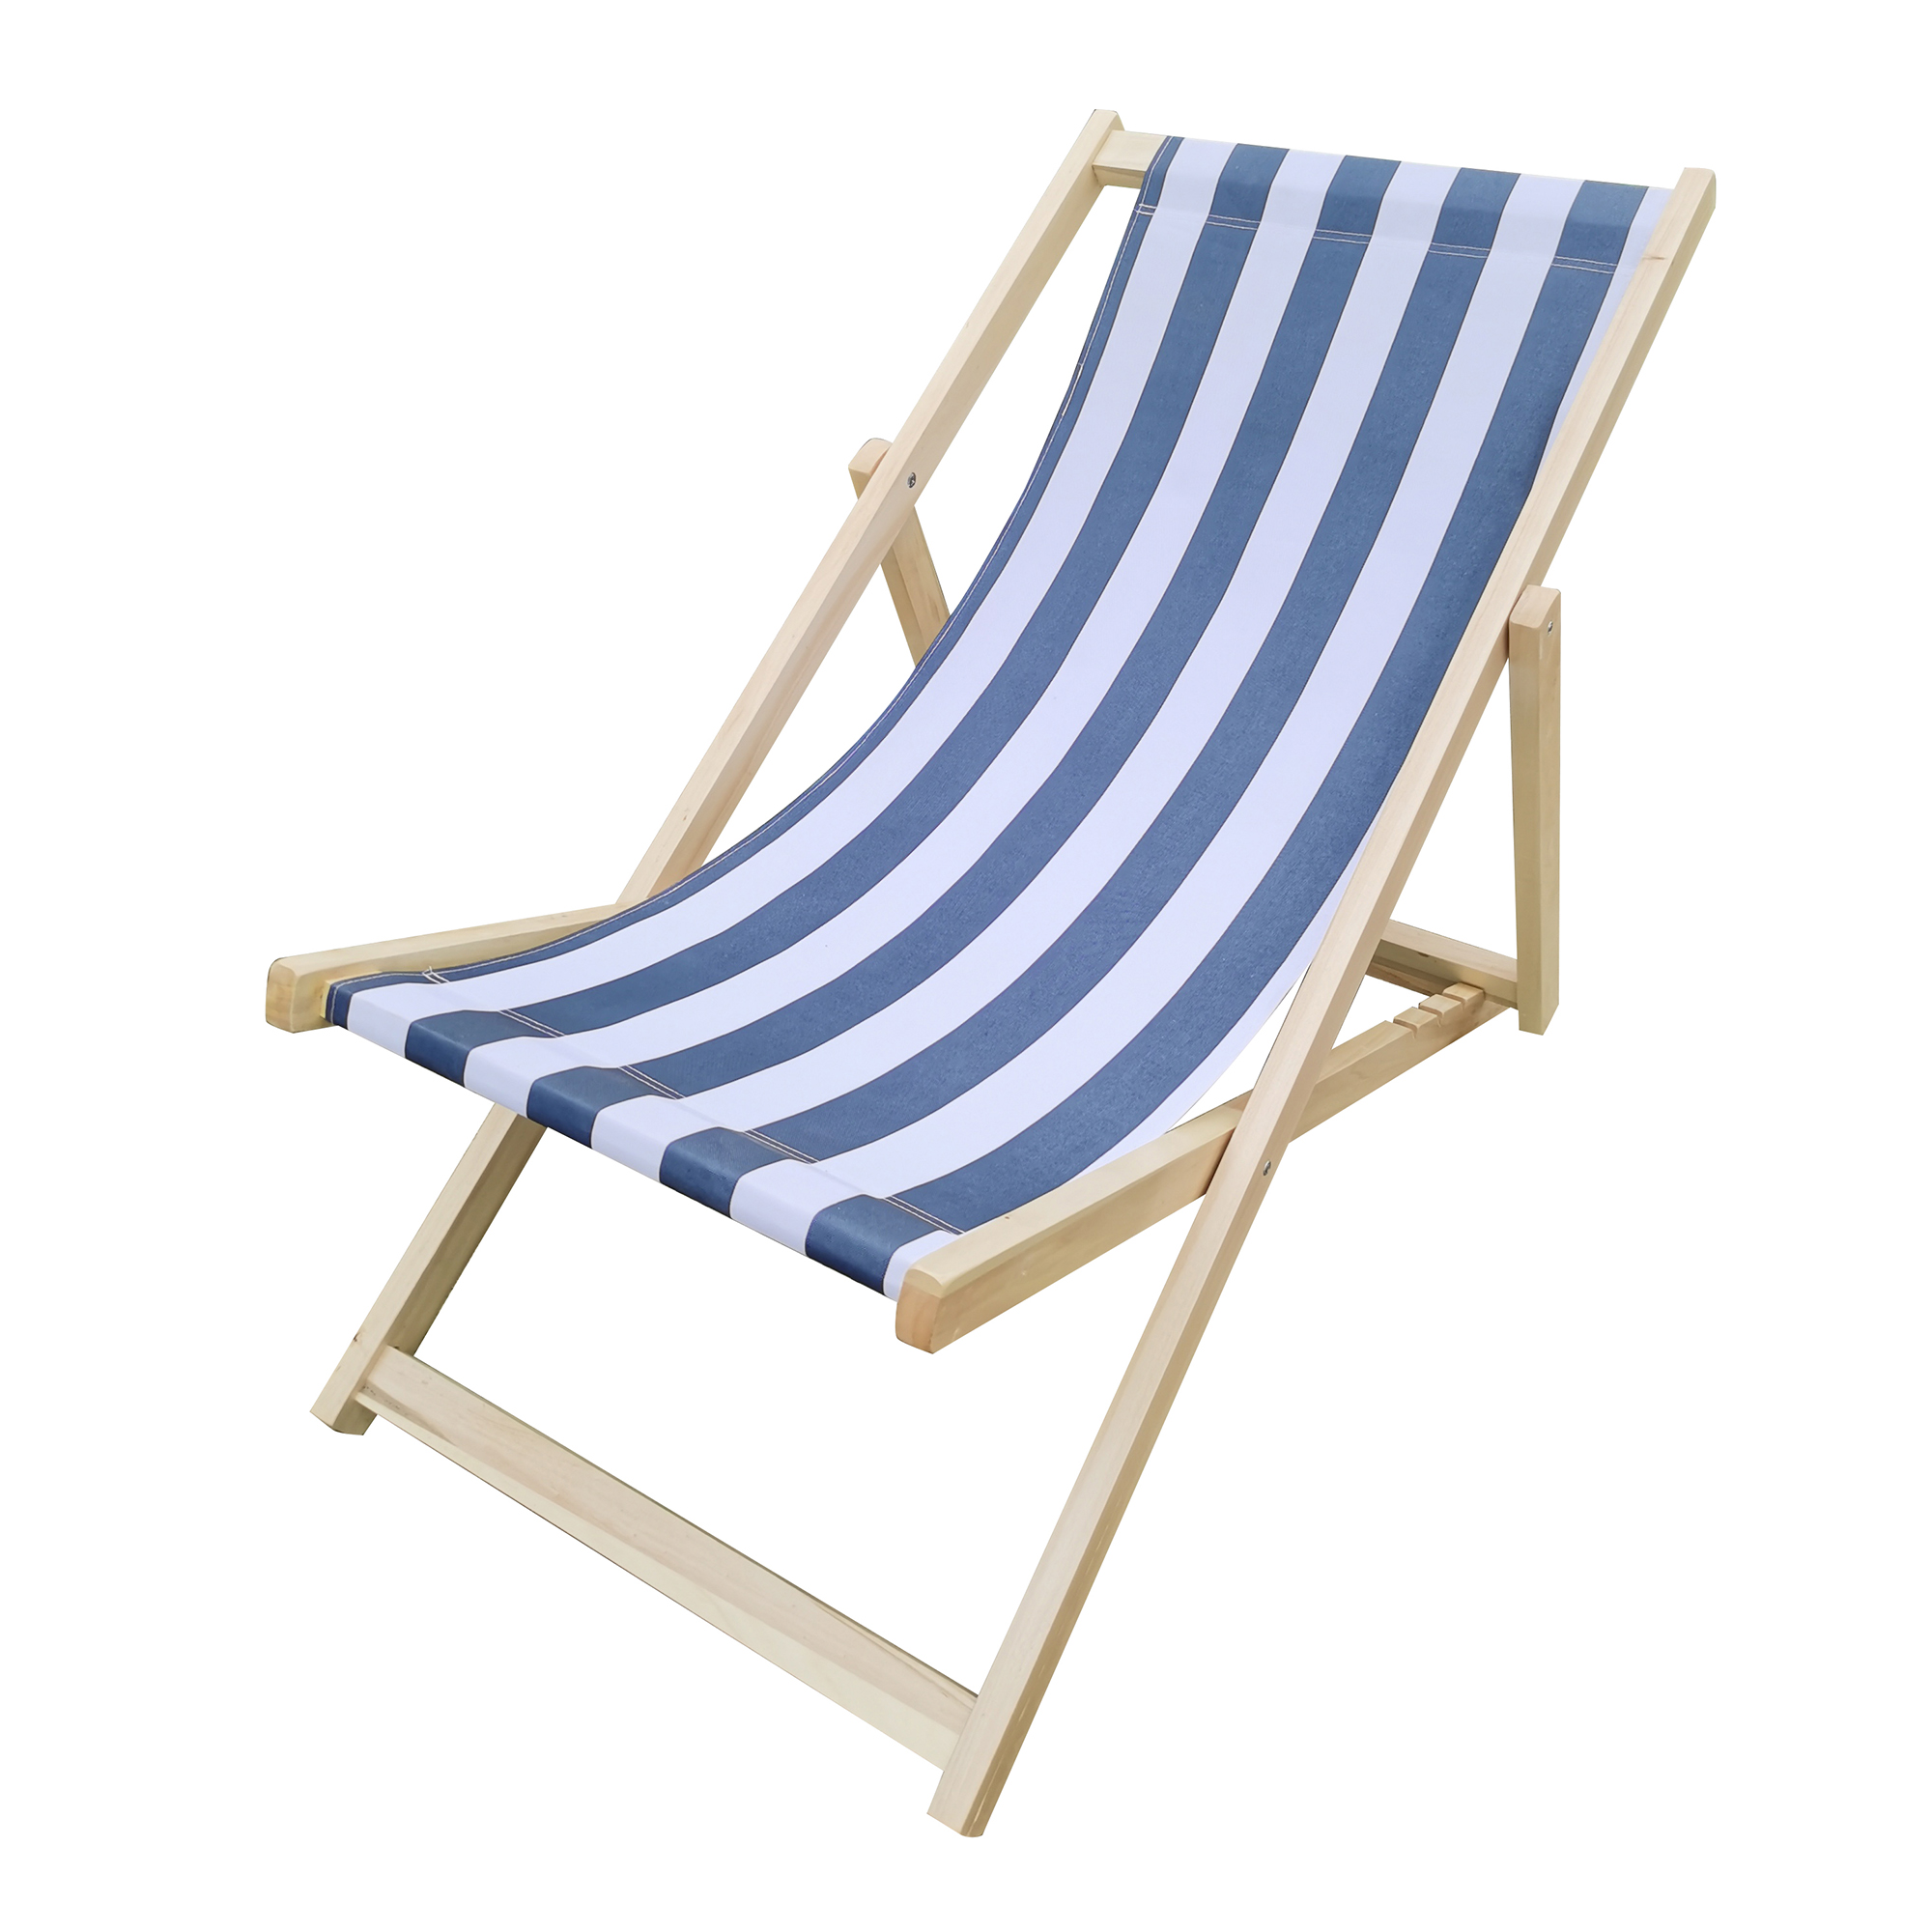 Outdoor Foldable Patio Lounge Chair, Beach Sling Chair, Outdoor Reclining Beach Chair Wooden Folding Adjustable Frame Solid Eucalyptus Wood with Blue Stripe Polyester Canvas Portable - image 5 of 7